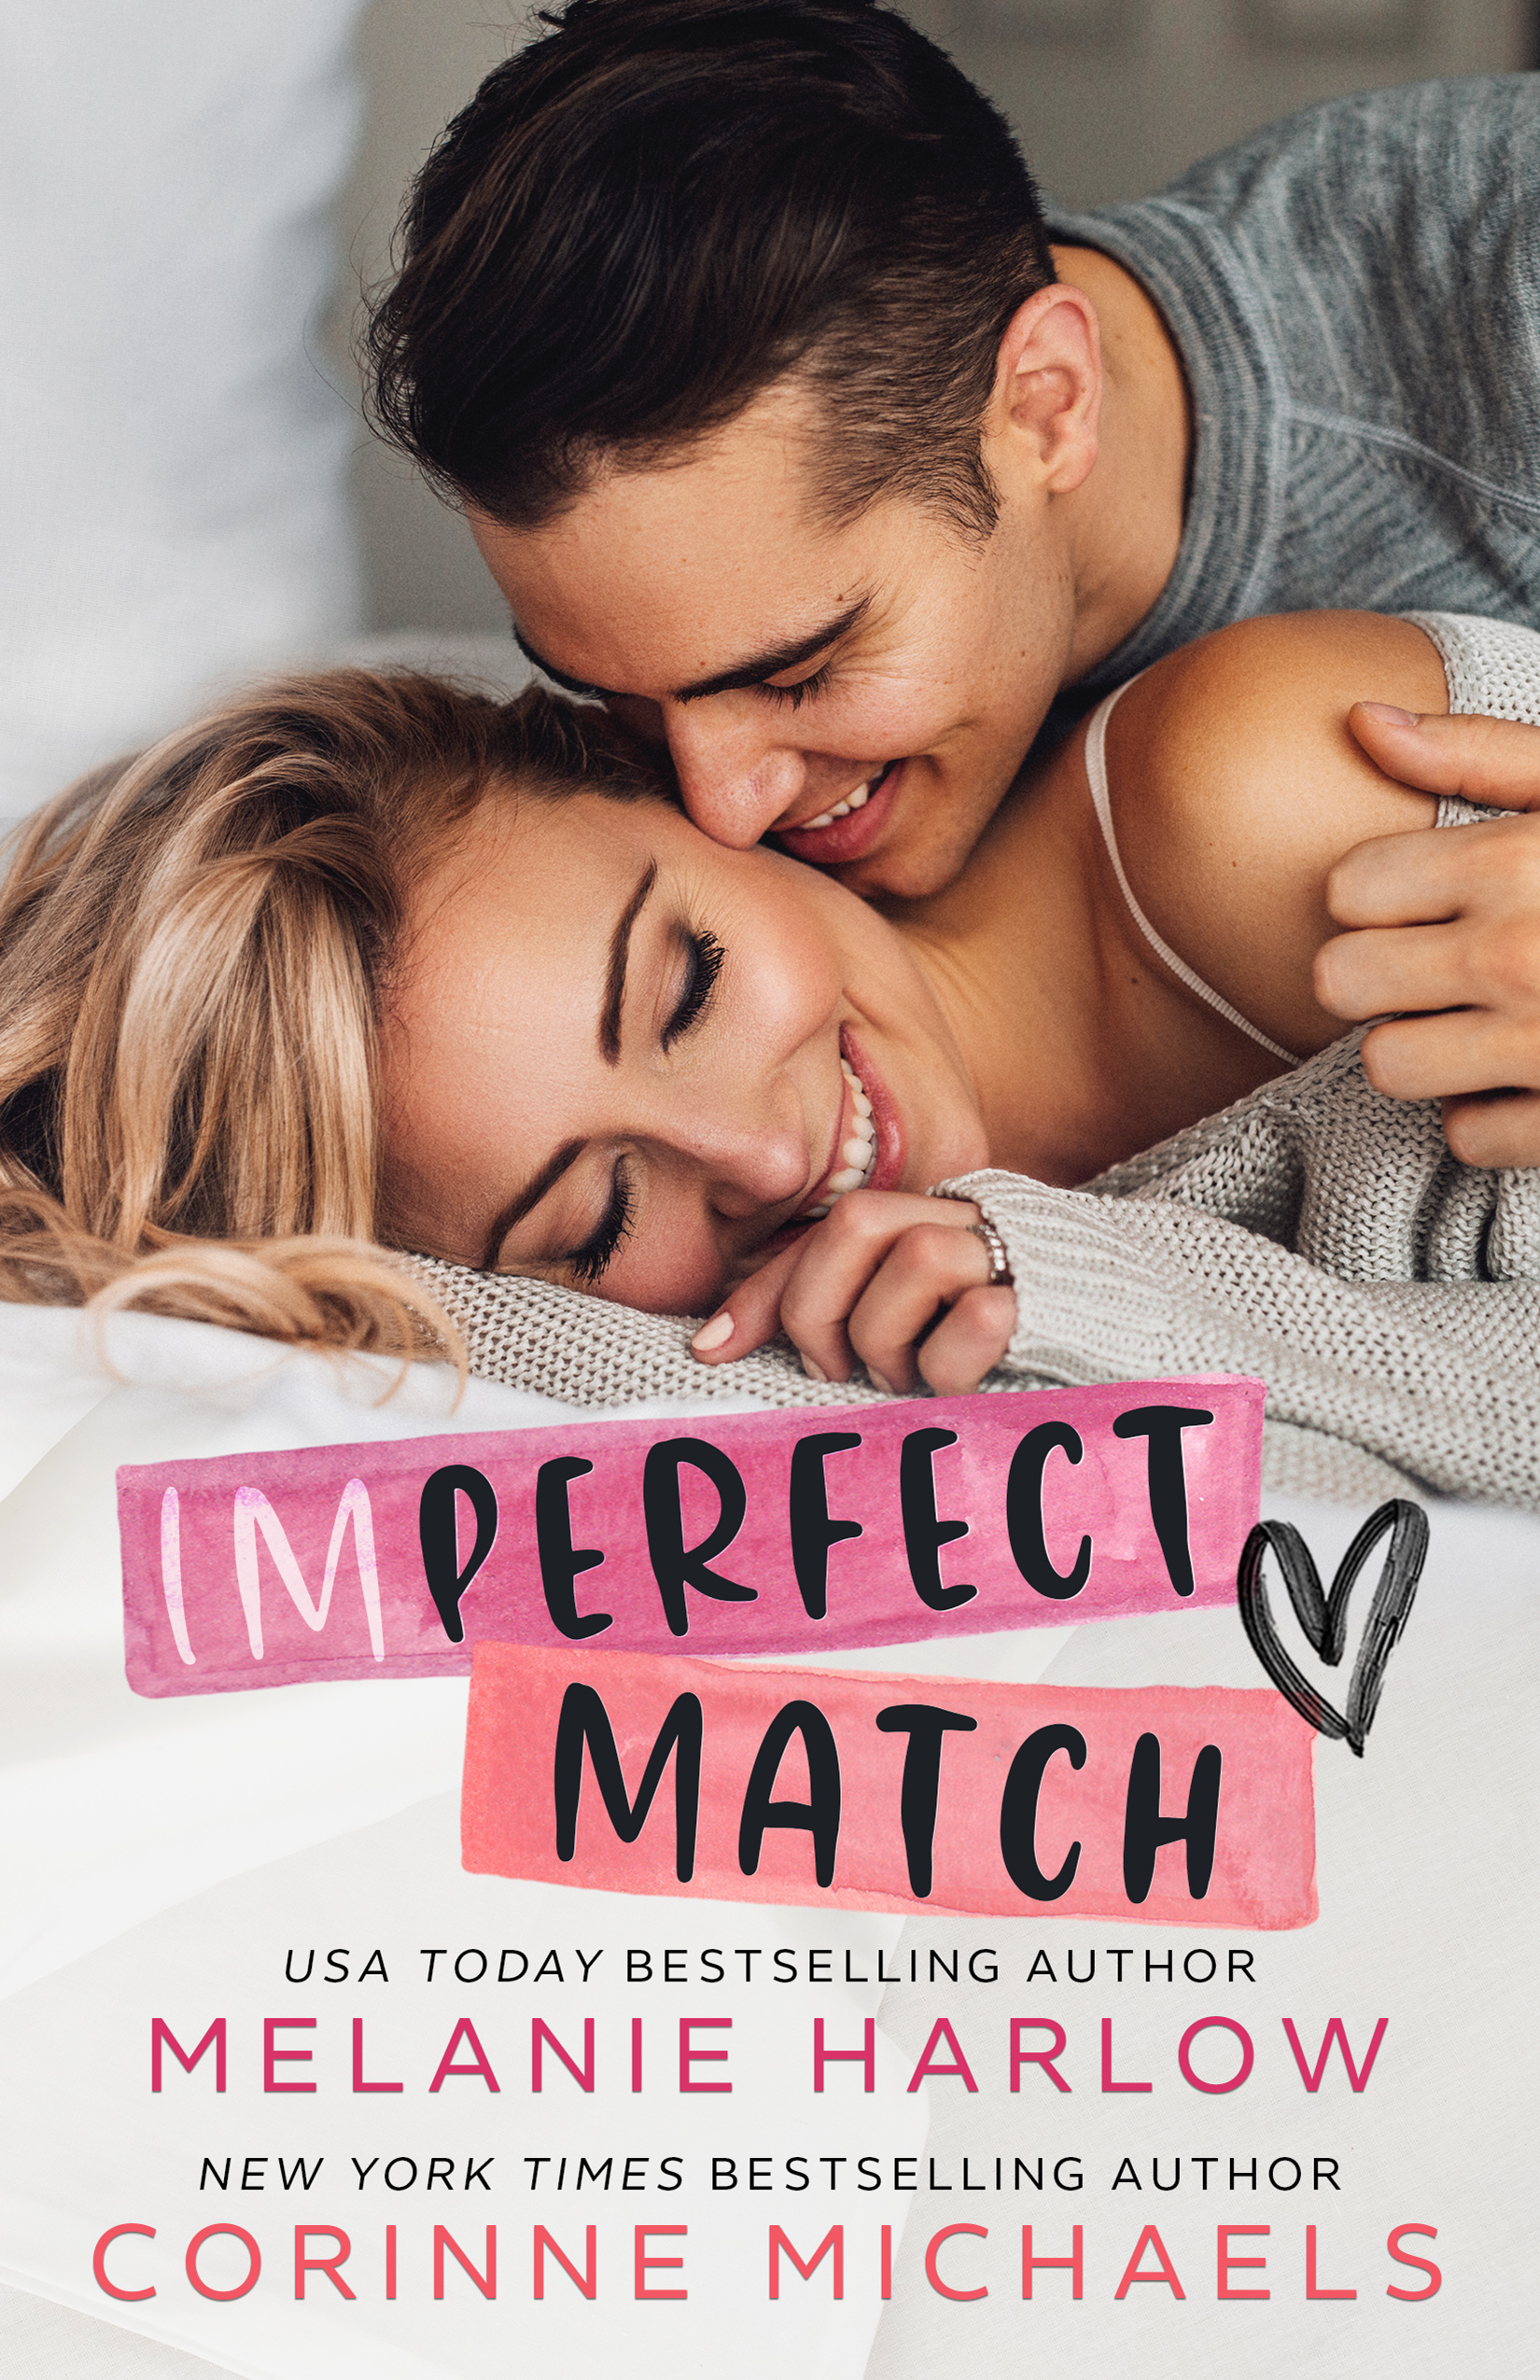 Imperfect Match by Melanie Harlow and Corrine Michaels [Cover Reveal]